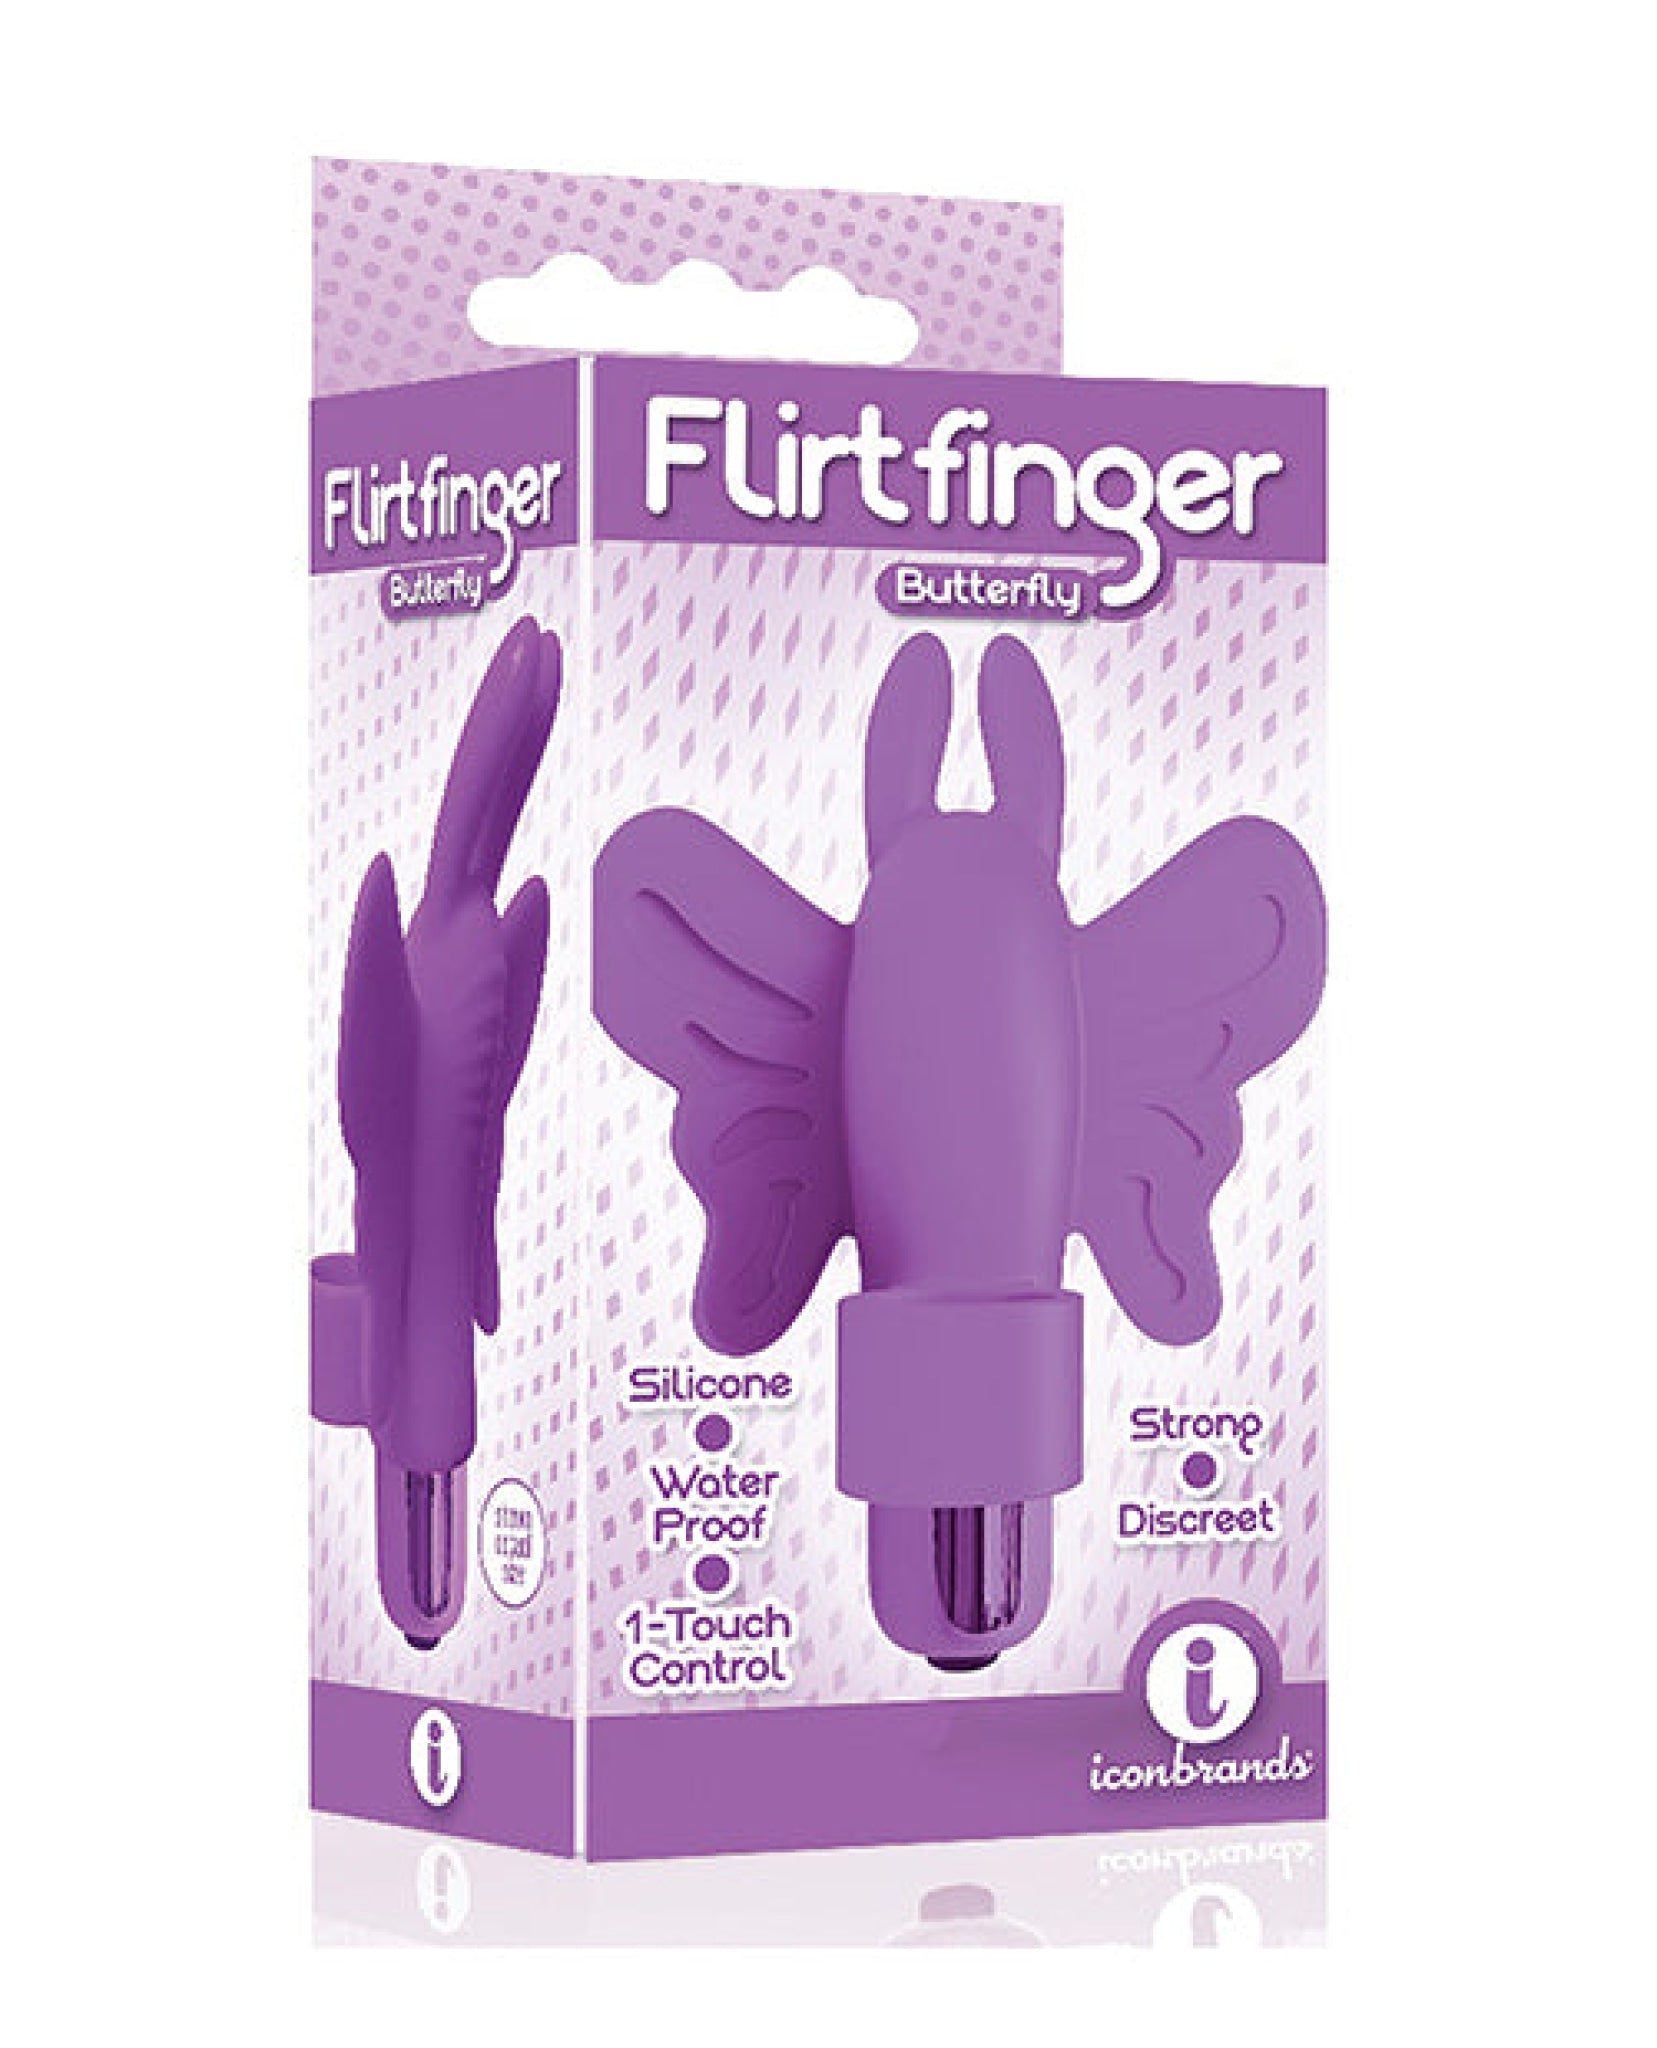 The 9's Flirtfinger Butterfly Icon